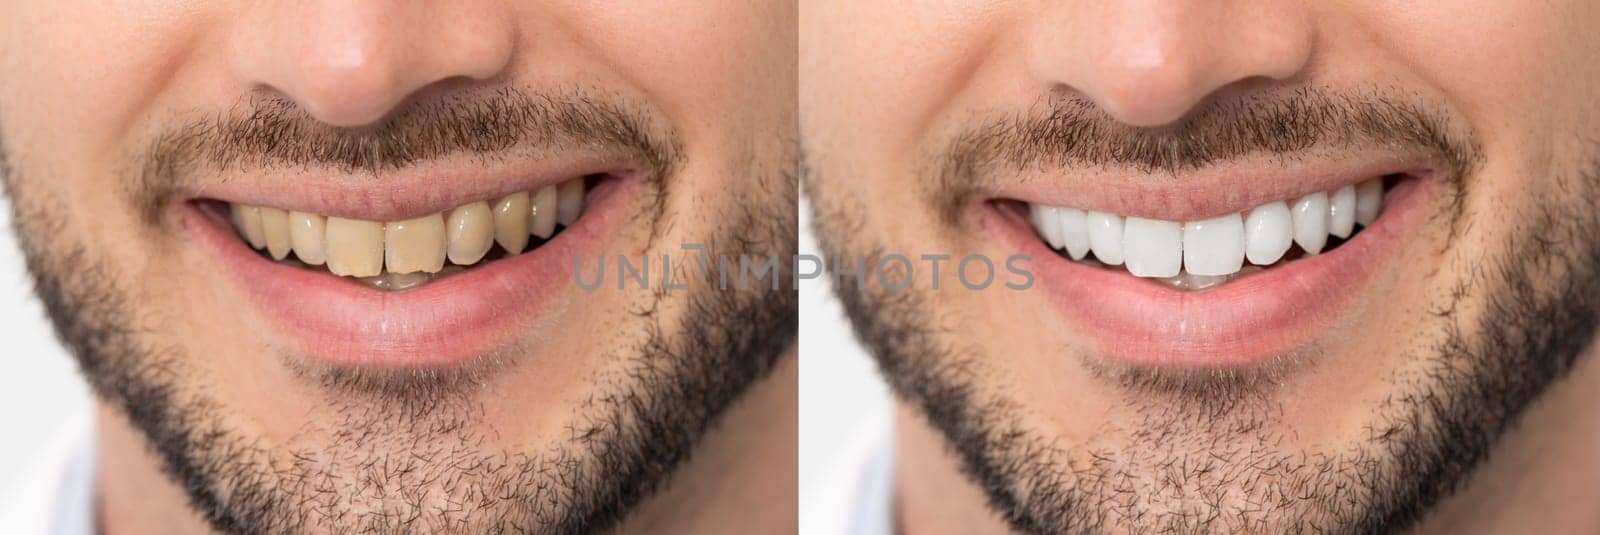 Teeth before and after whitening by simpson33